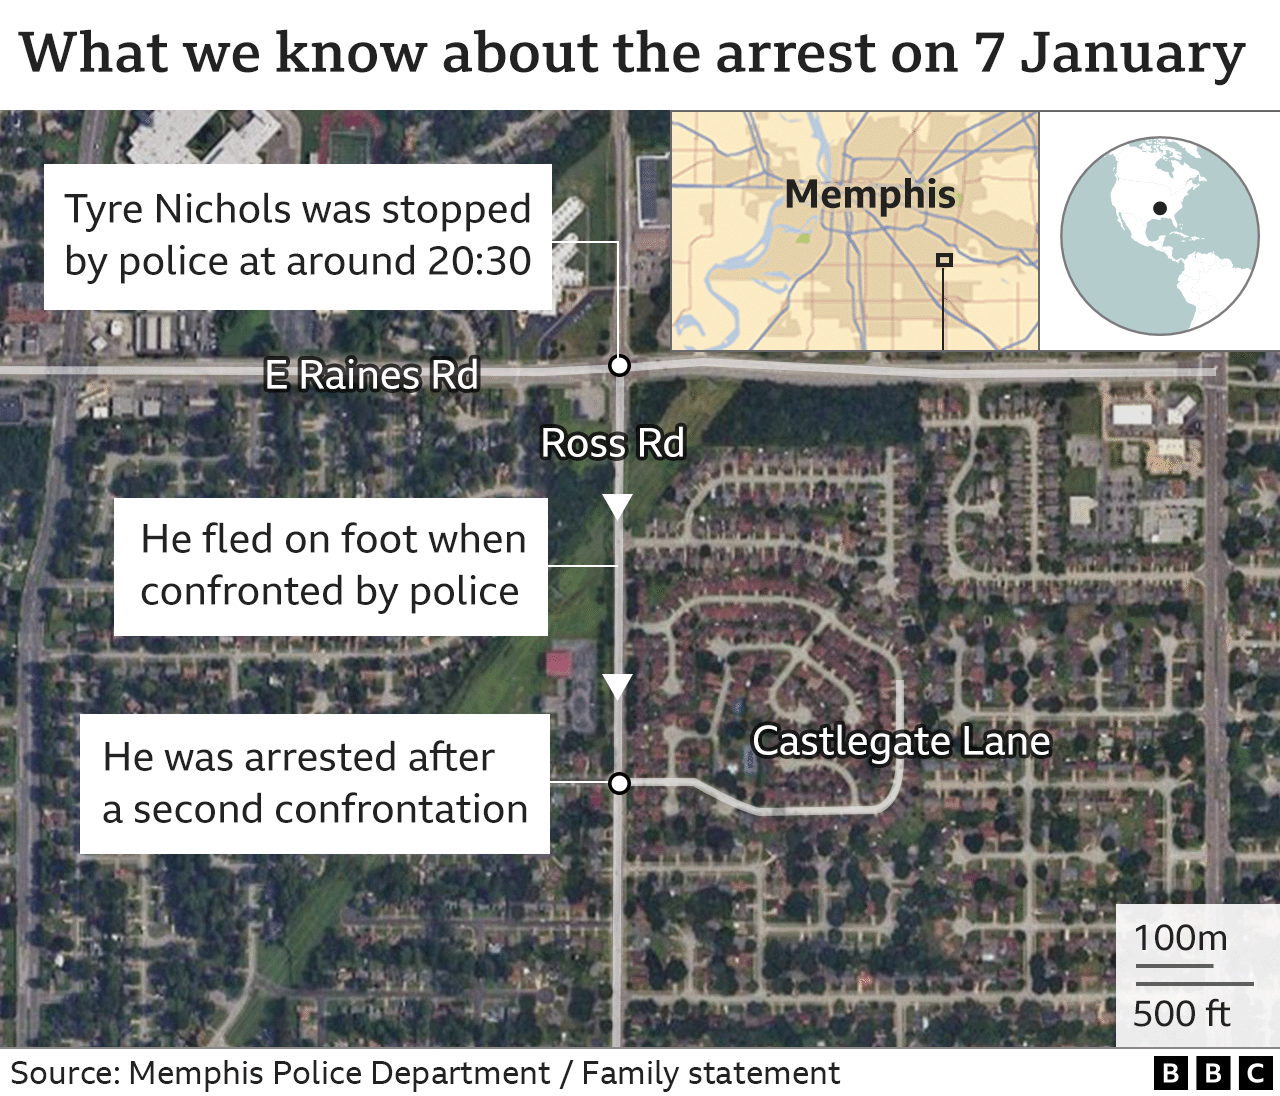 A map showing what we know about the arrest of Tyre Nichols on the night of the 7 January: He was stopped by police at around 20:30 at the junction of East Raines Rd and Ross Road in Memphis, but he fled south along Ross Road before he was apprehended near Castlegate Lane after a second confrontation with police.